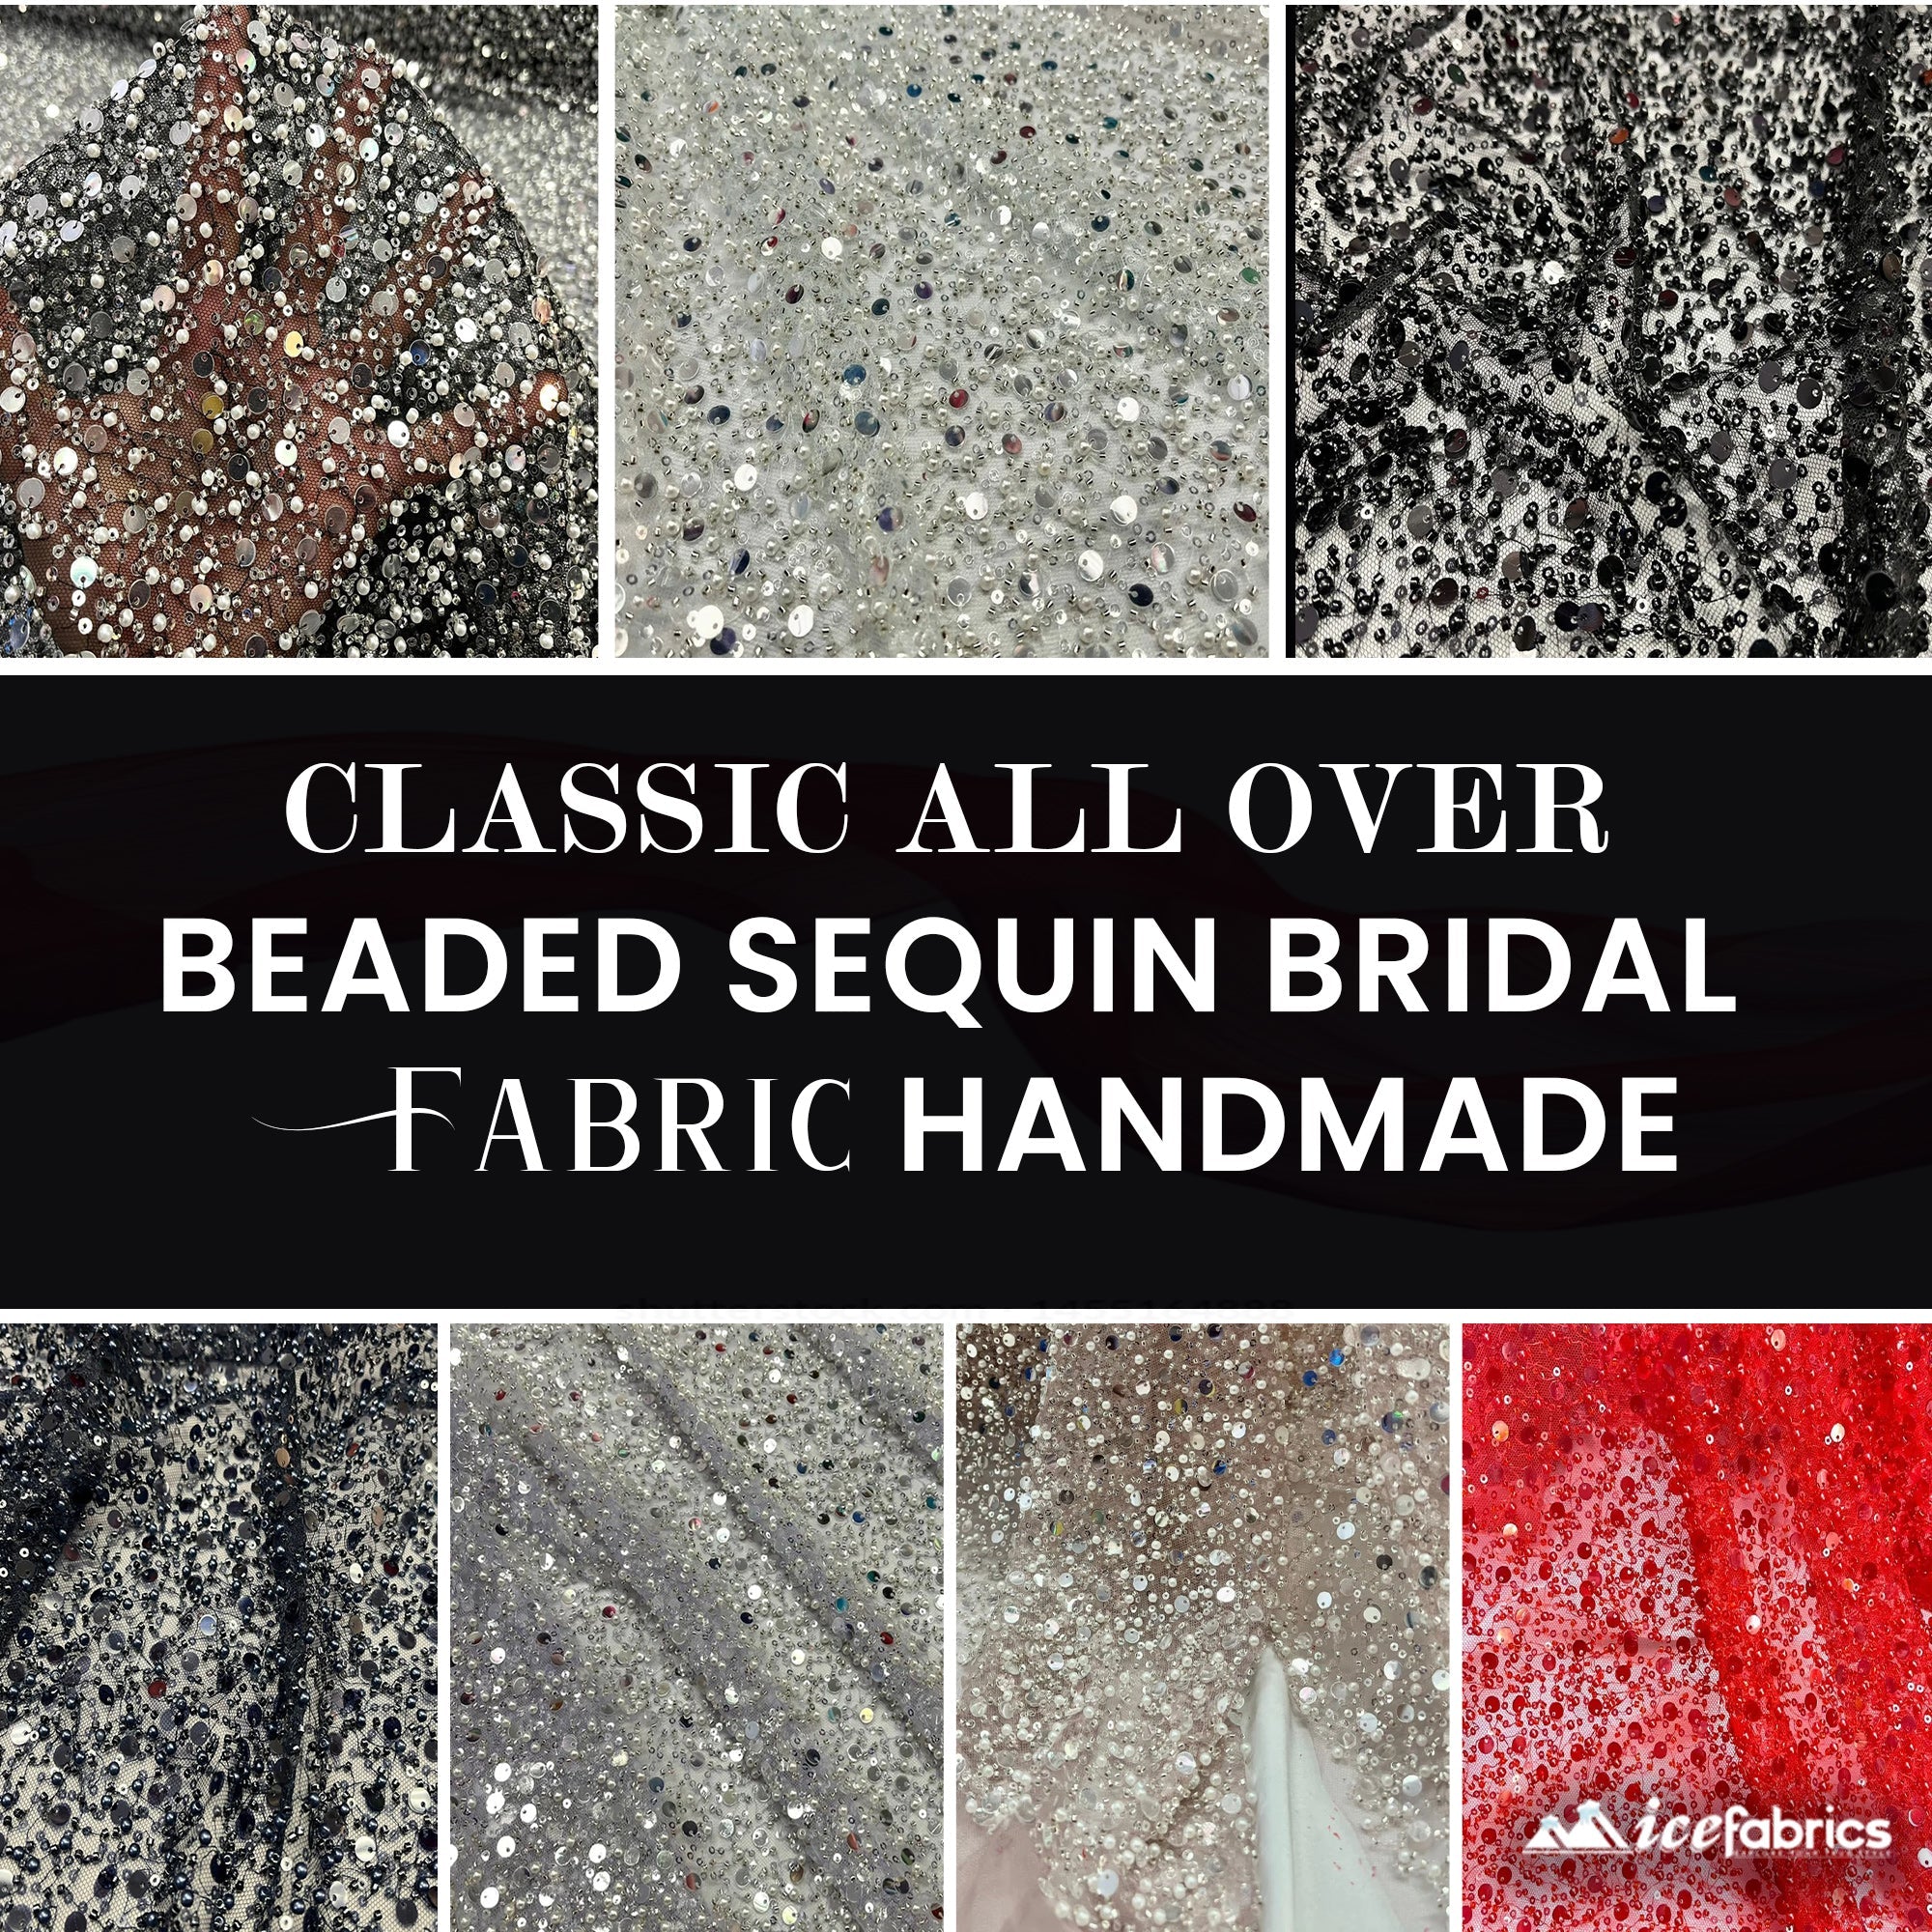 Classic All Over Beaded Sequin Bridal Fabric / Handmade